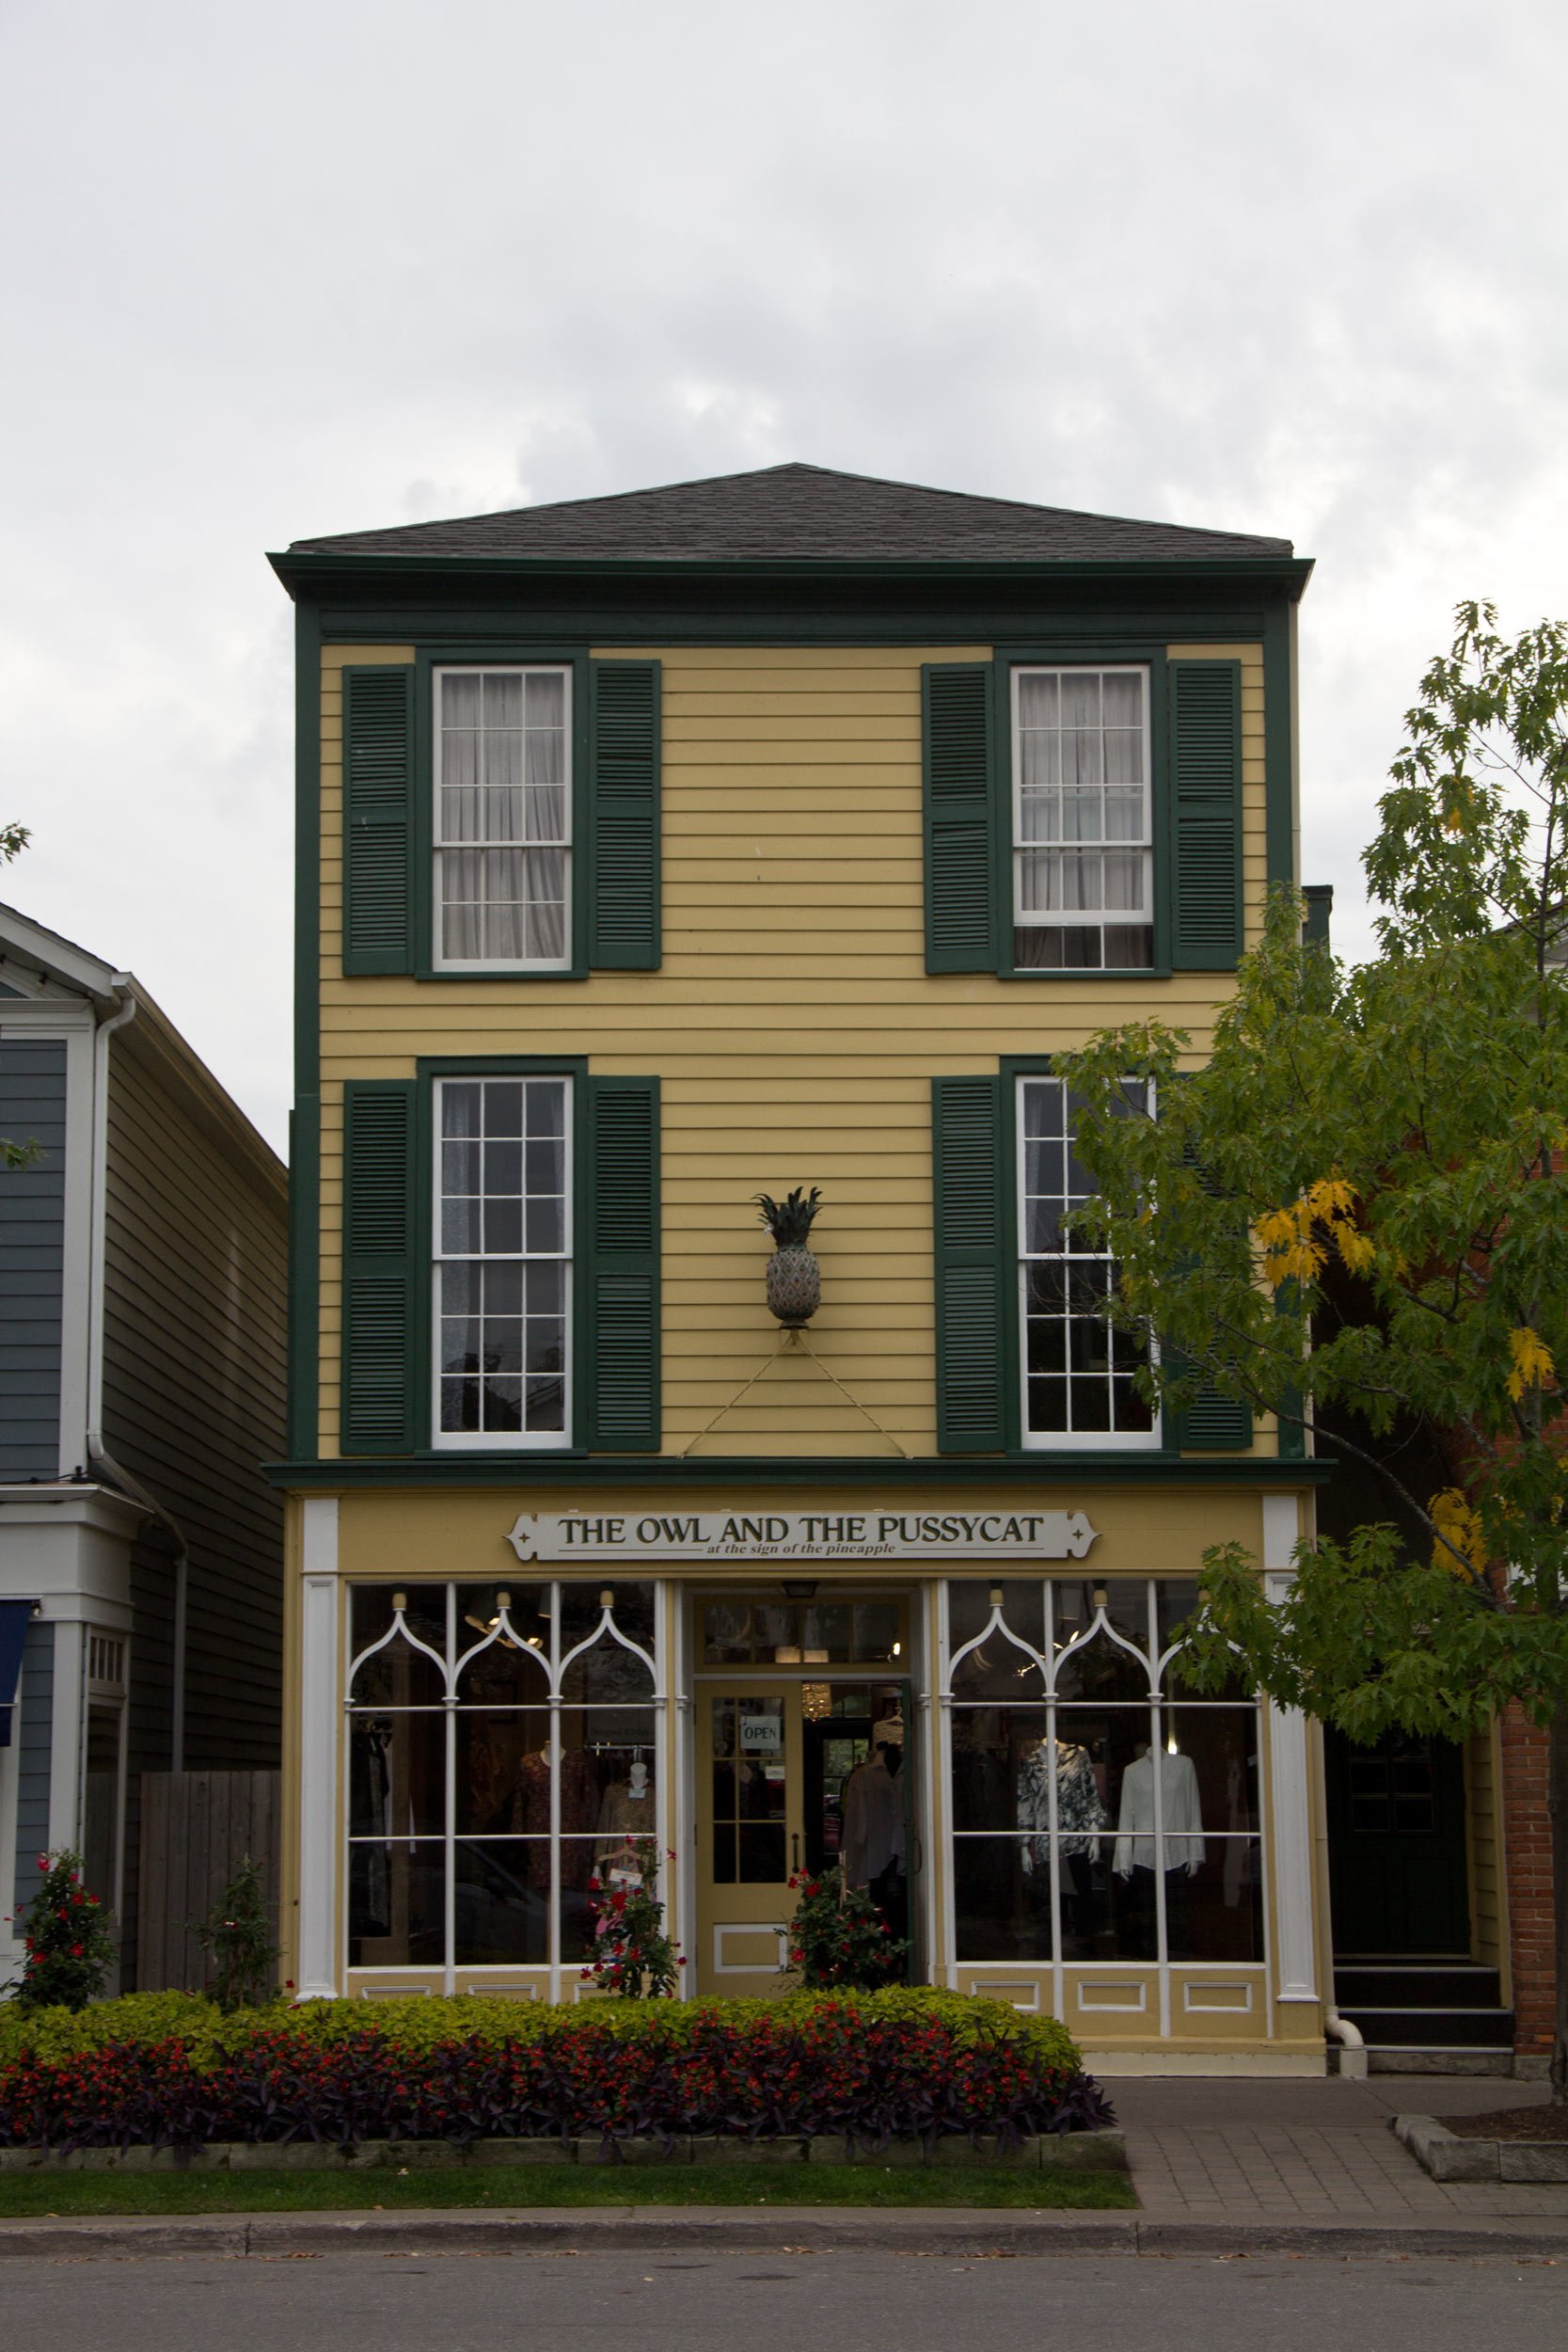 niagara-on-the-lake-downtown-shops-owl-and-pussycat